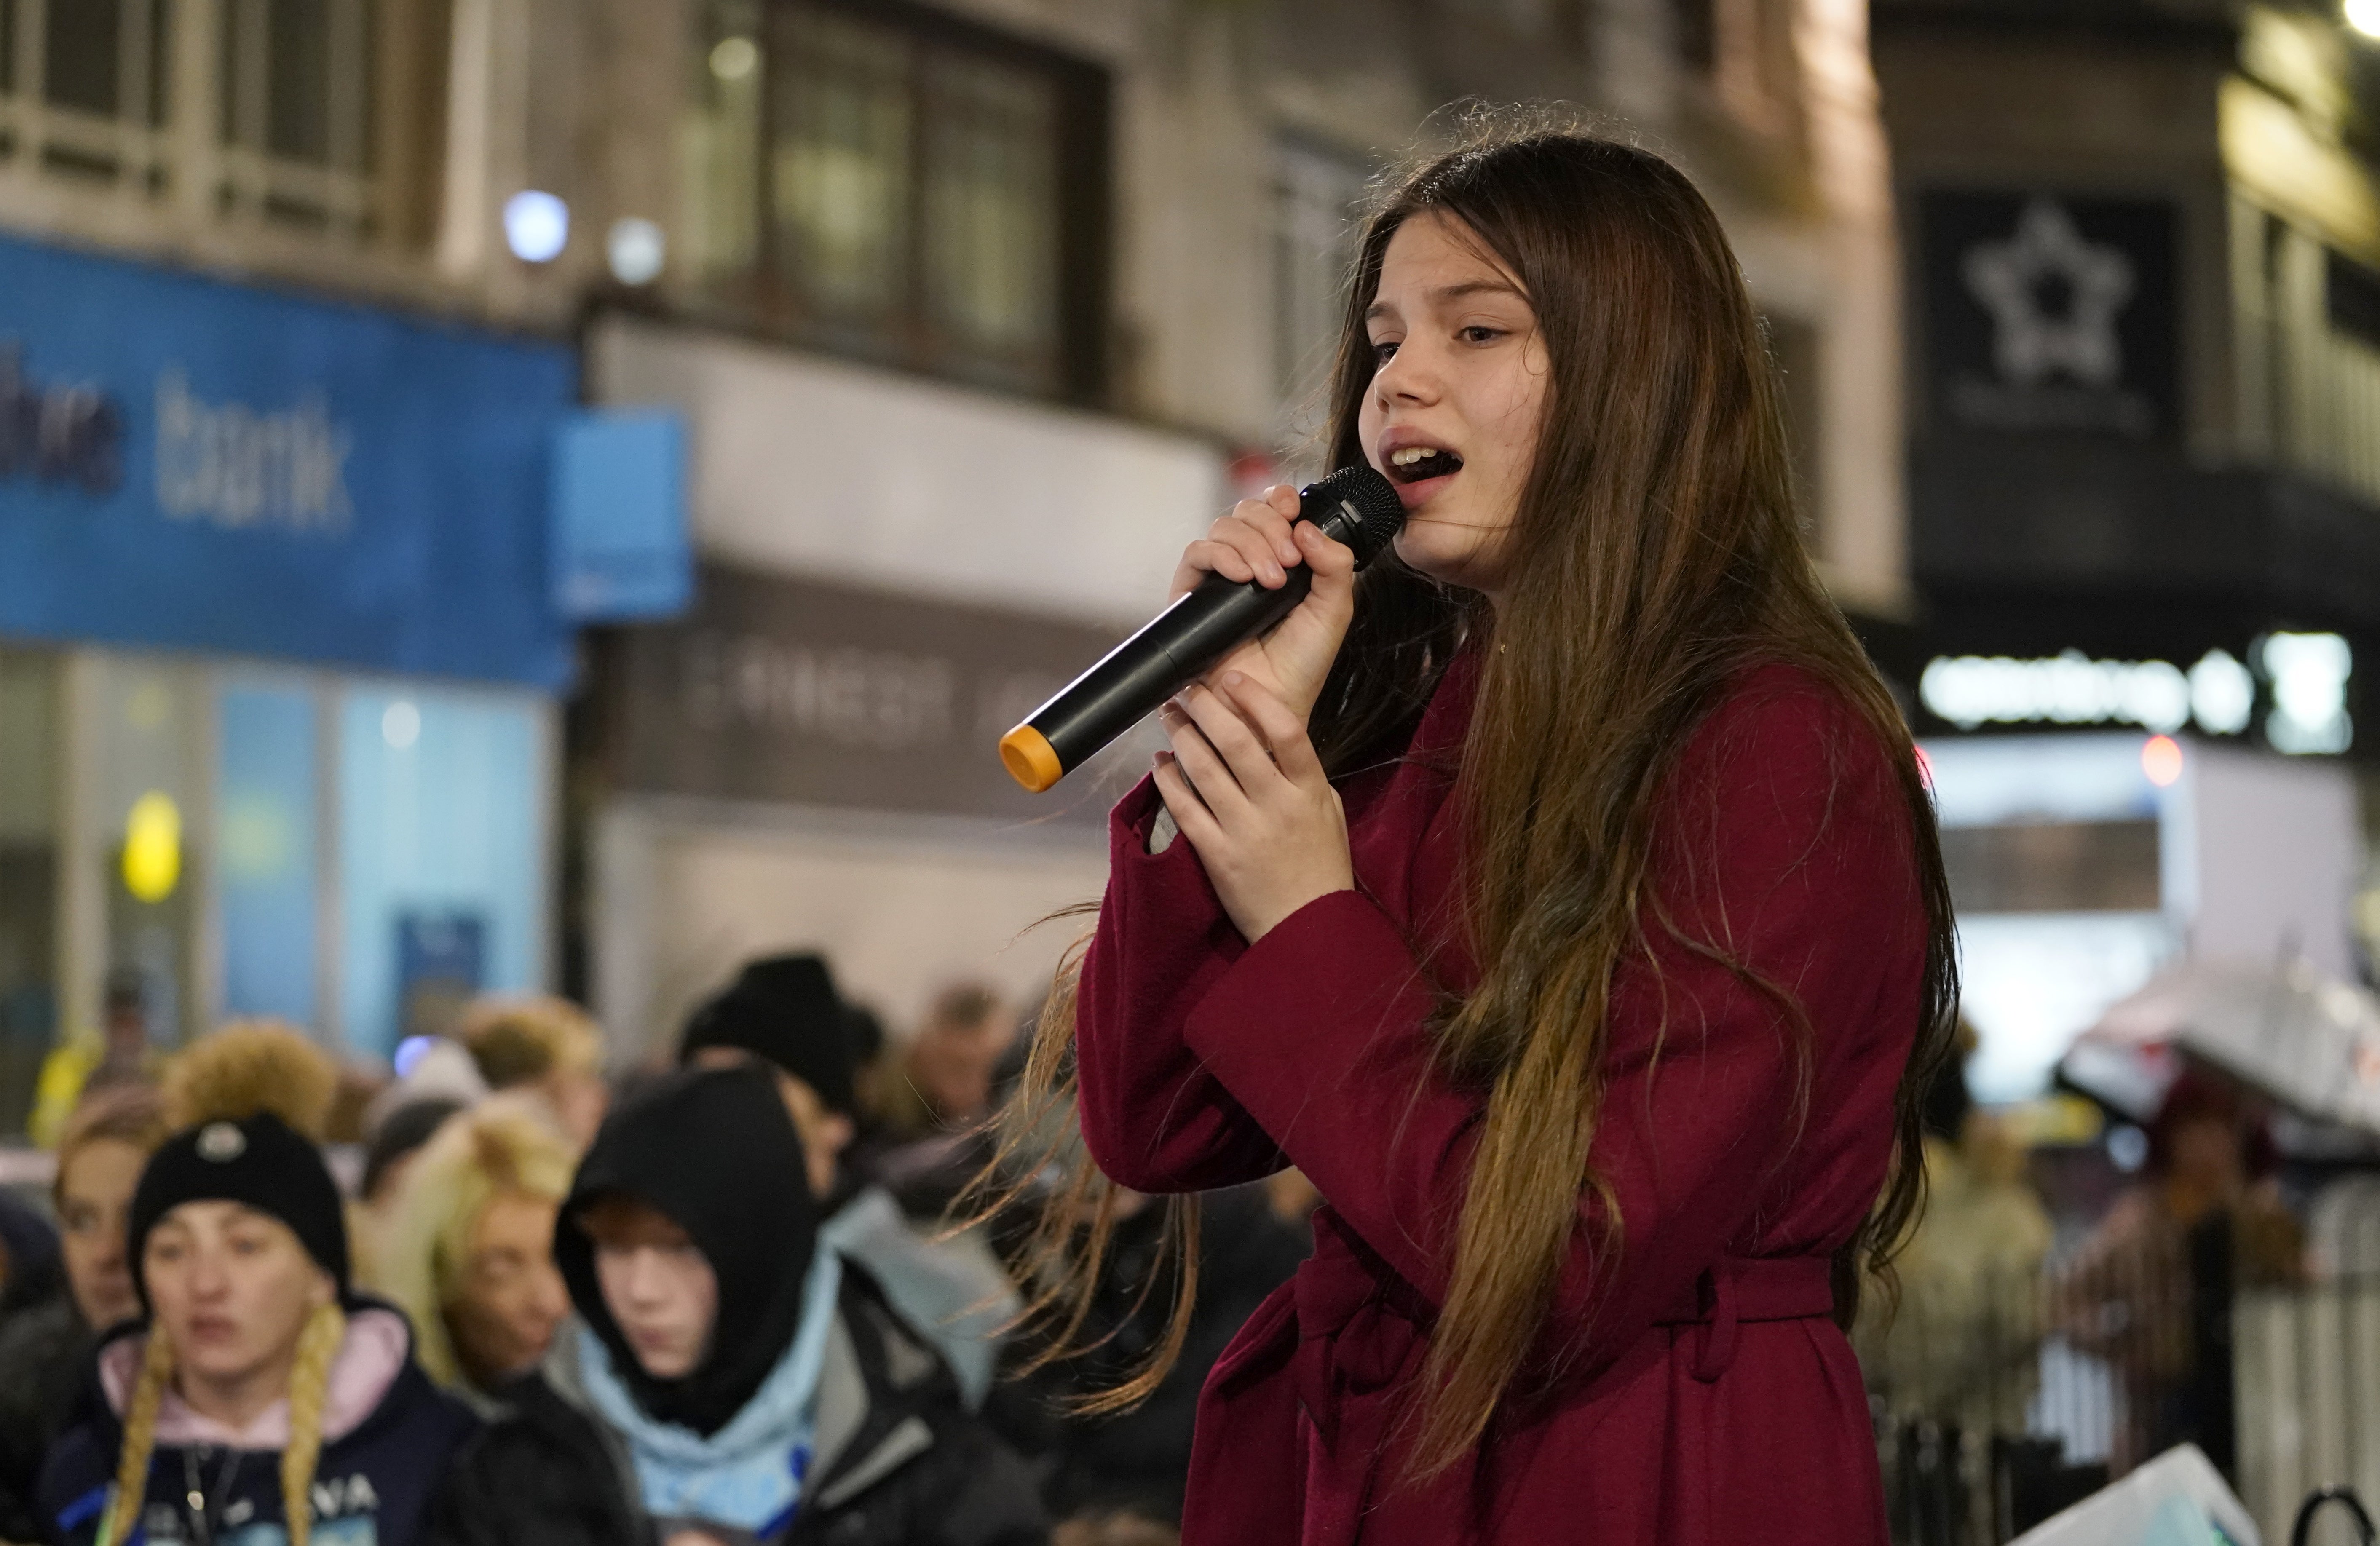 12-year-old Astrid Smith sings during the vigil (Danny LAwson/PA)